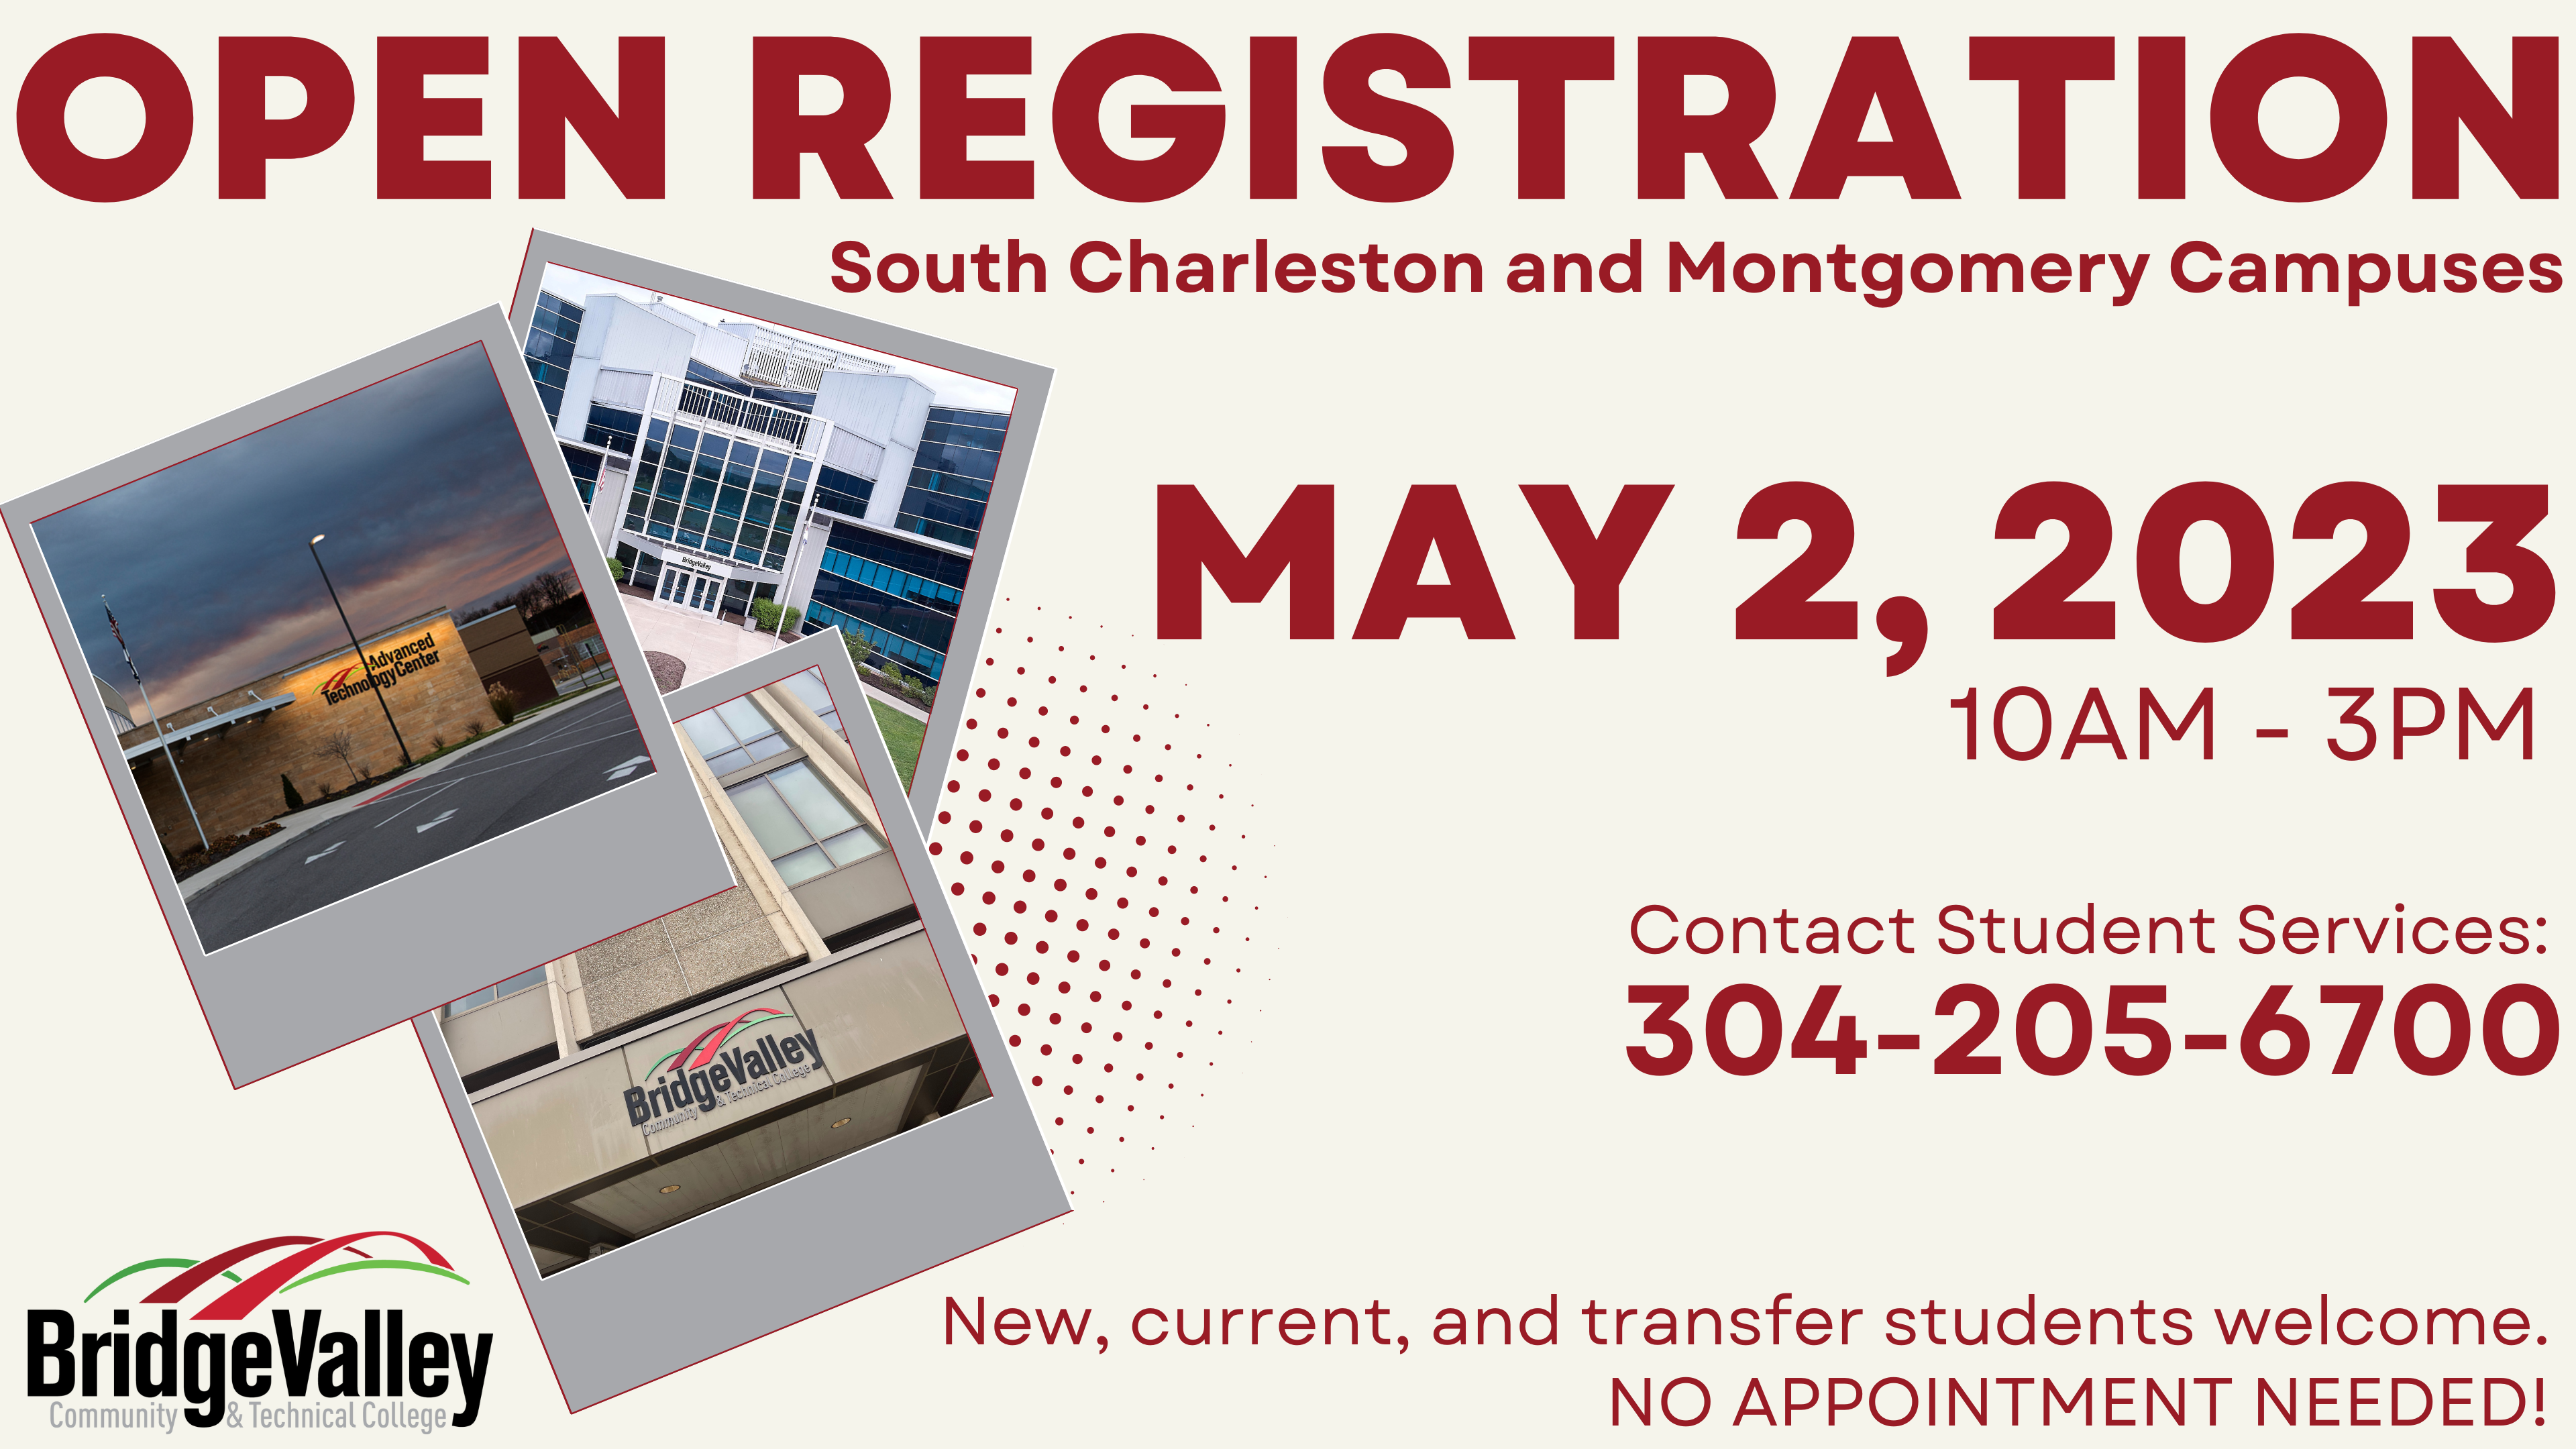 Open Registration May 2